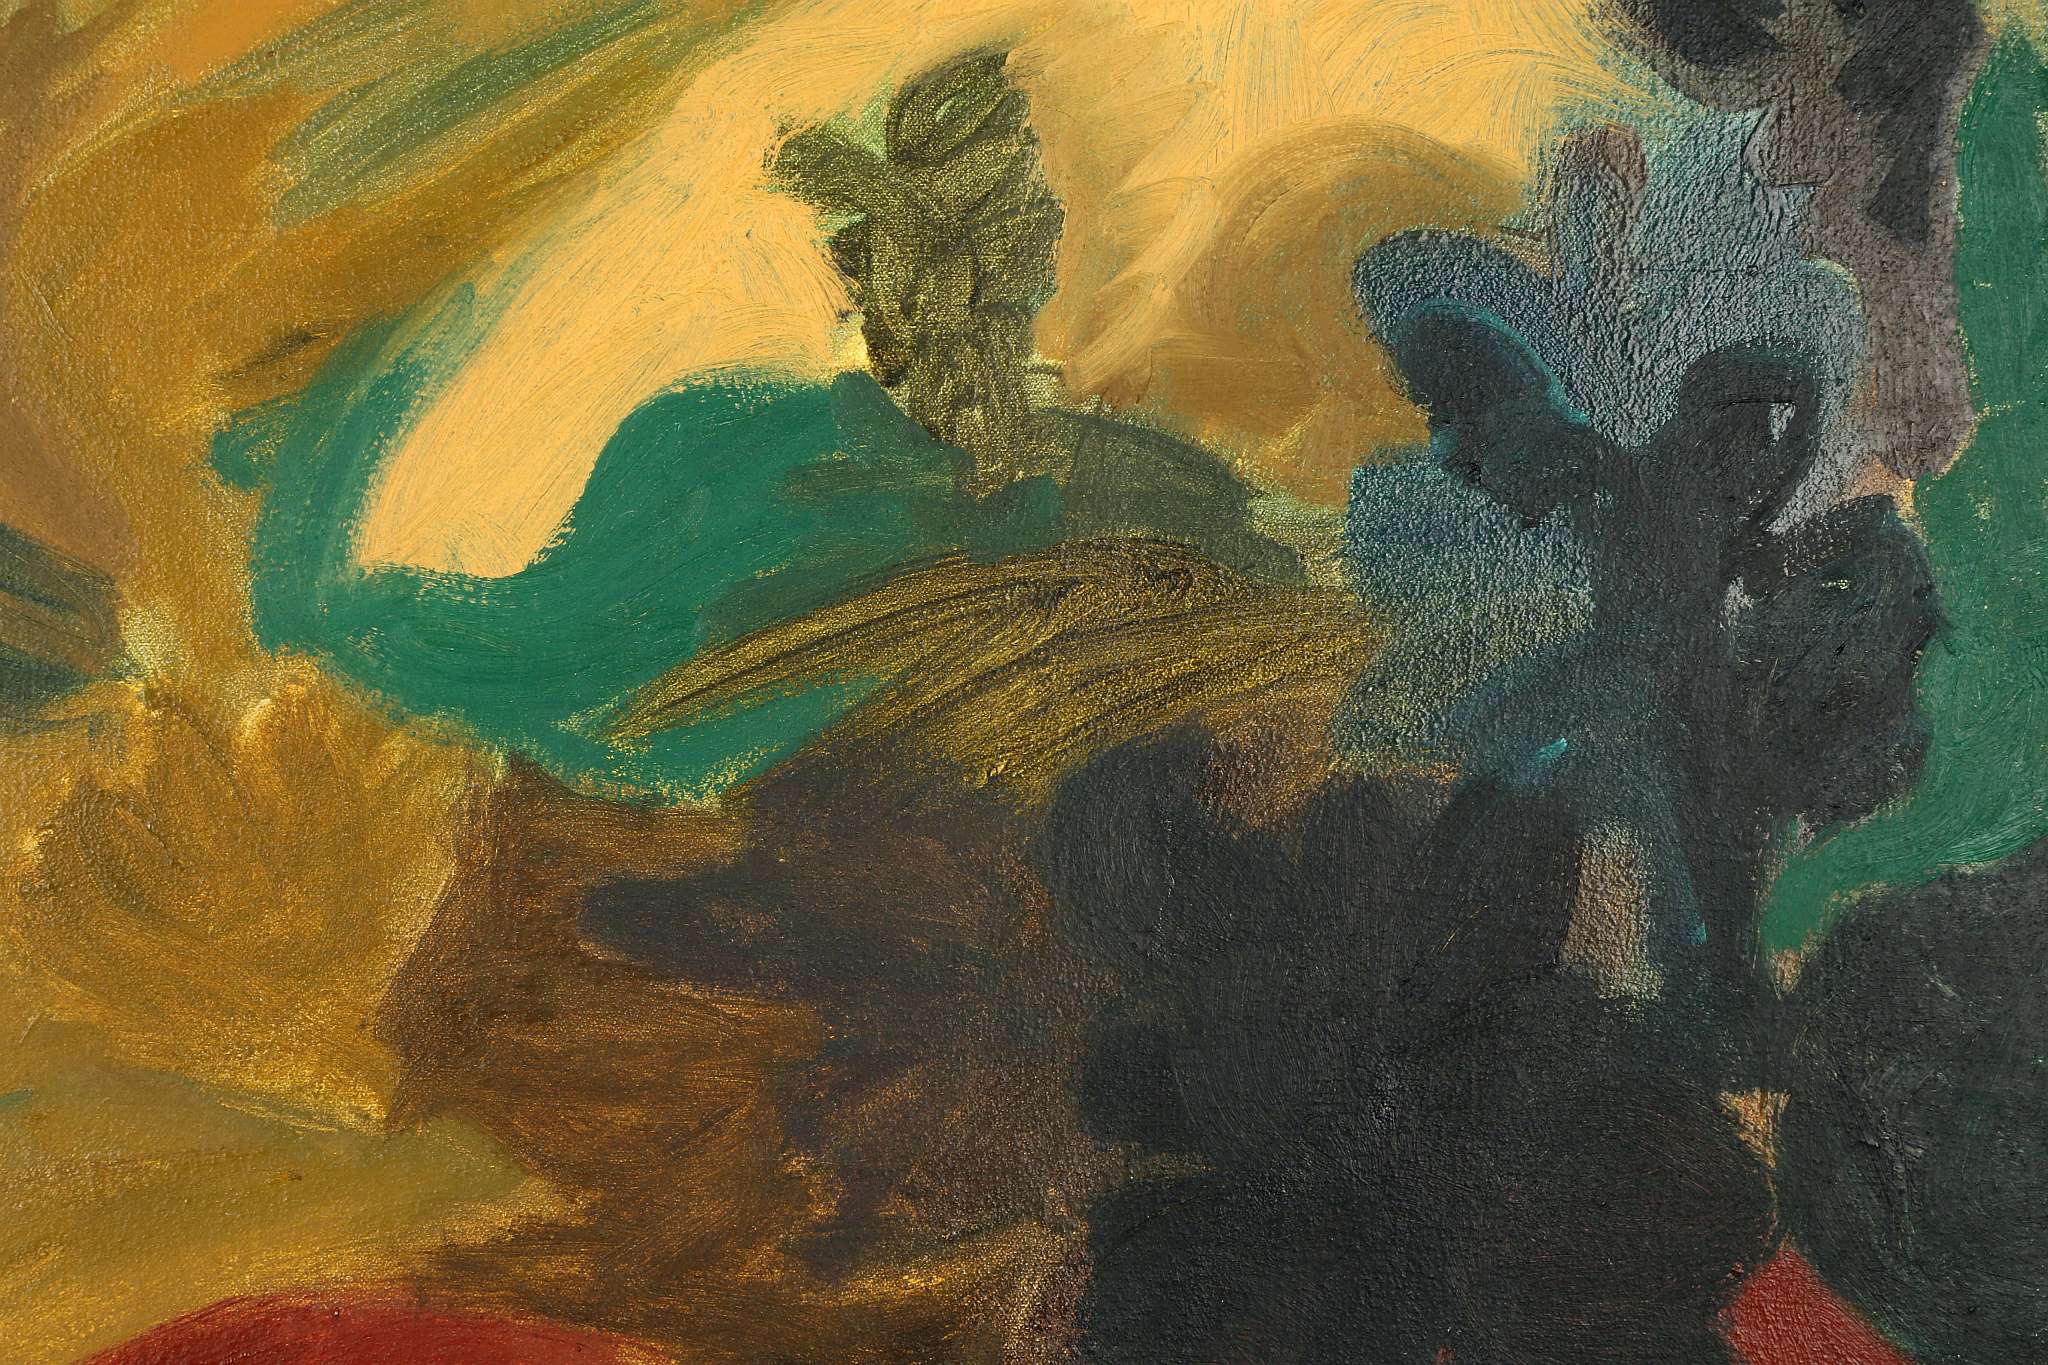 Lucy Ross, 20th century British, 'Portuguese Landscape', oil on canvas, signed lower left and - Image 3 of 5